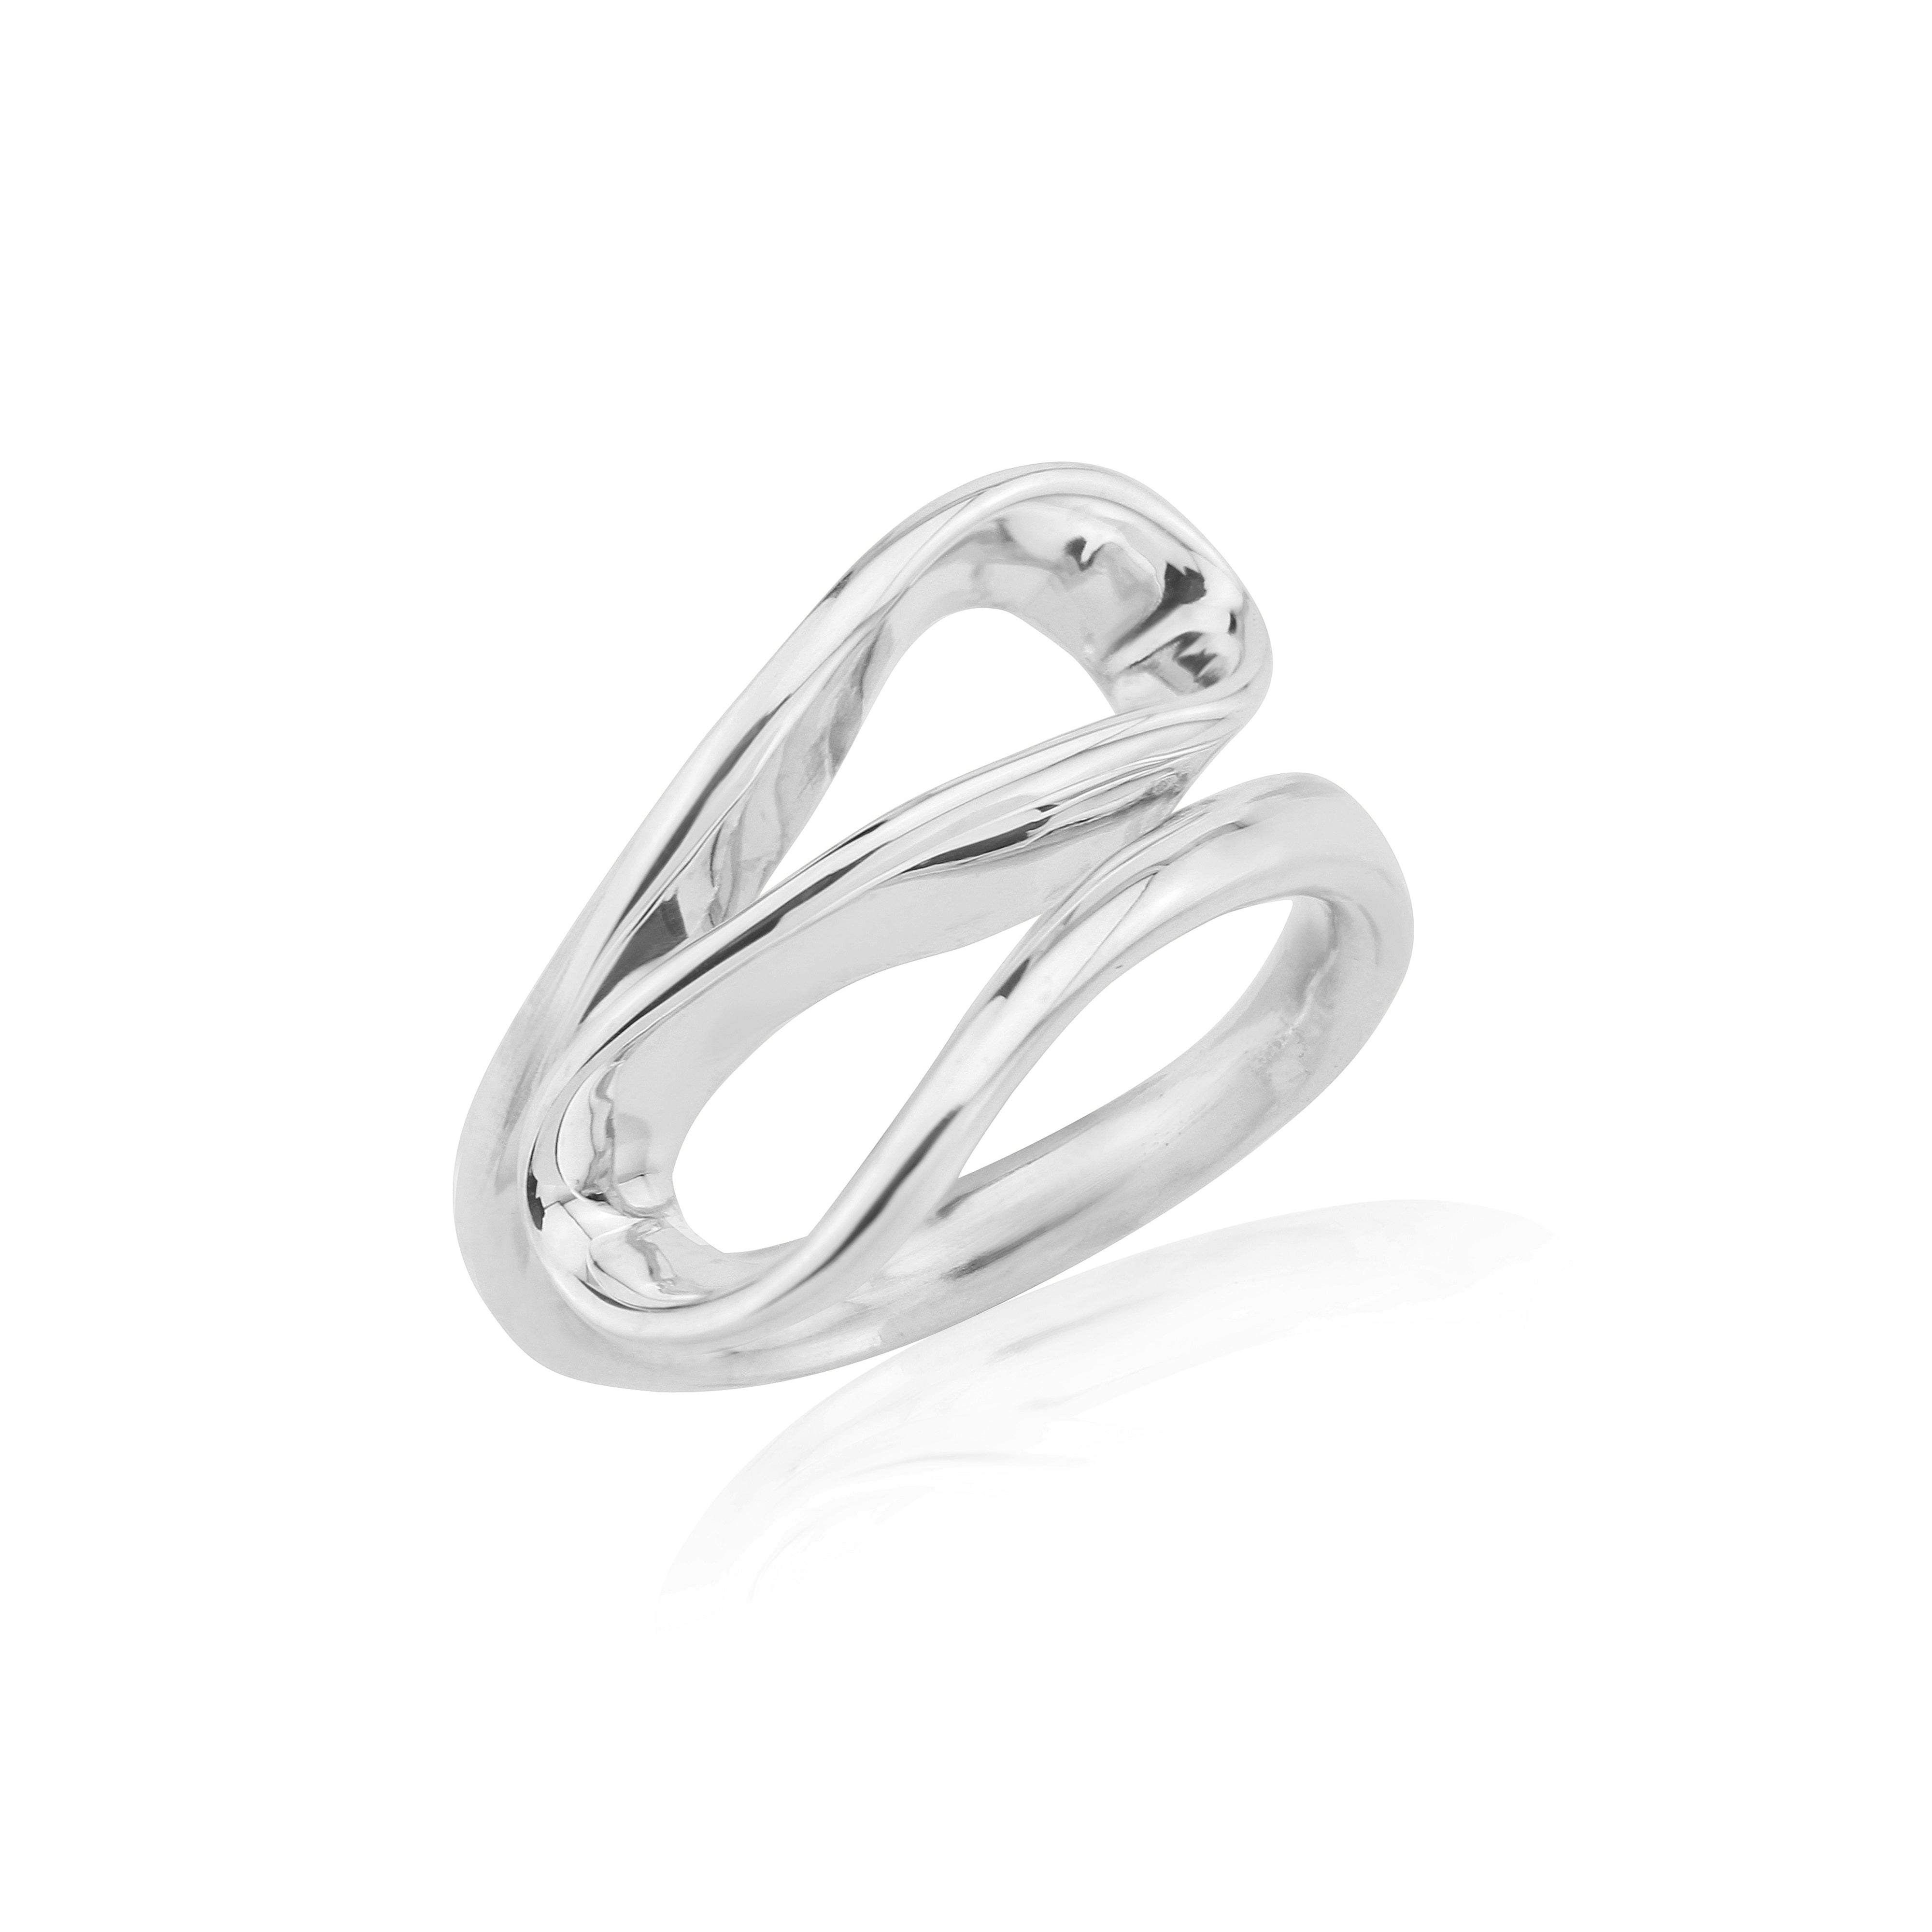 Handmade Silver Ring with Figure of Eight Design